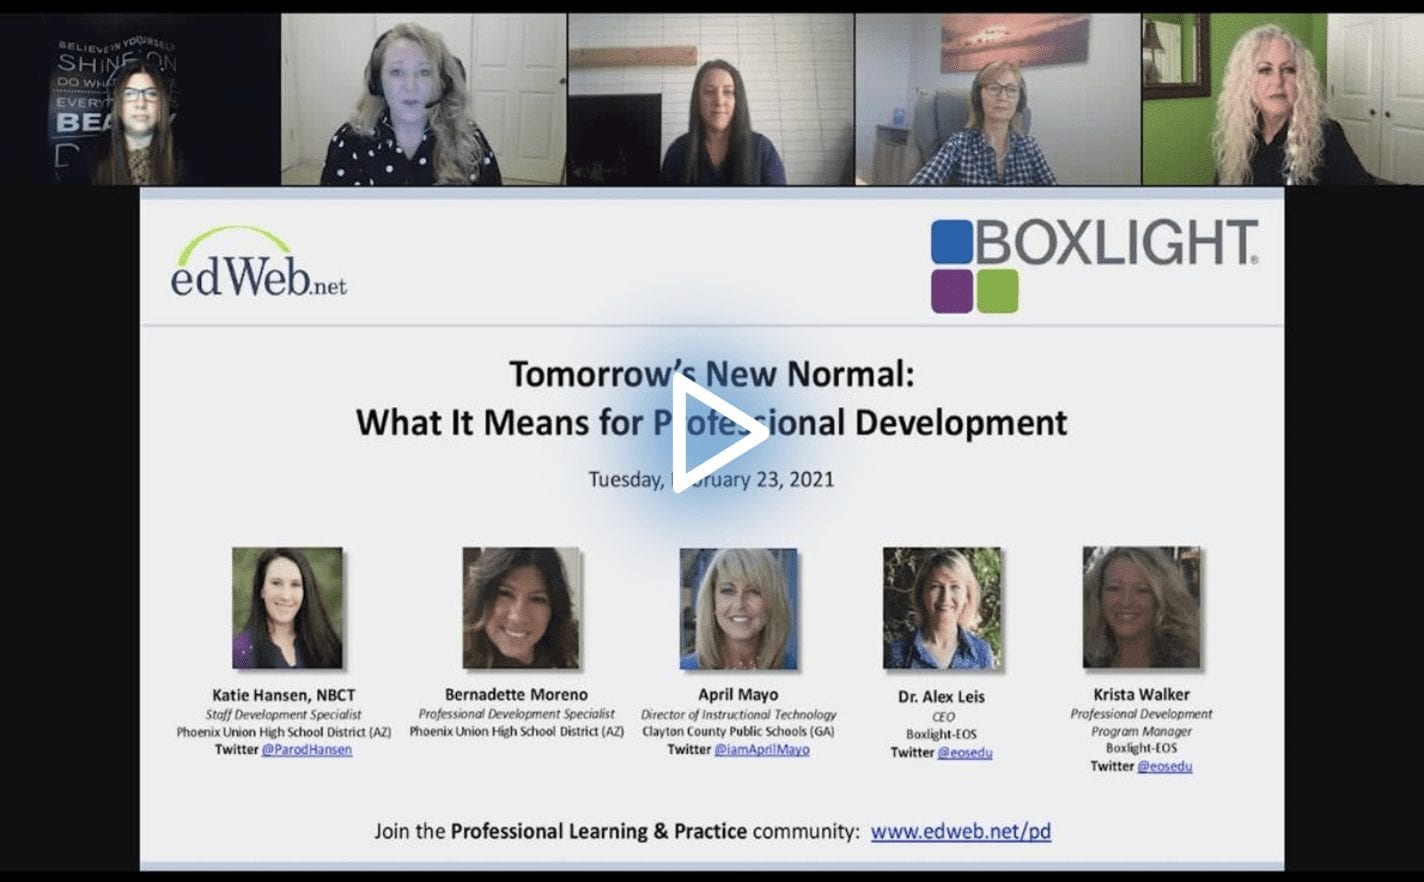 Tomorrow’s New Normal: What It Means for Professional Development edLeader Panel recording link